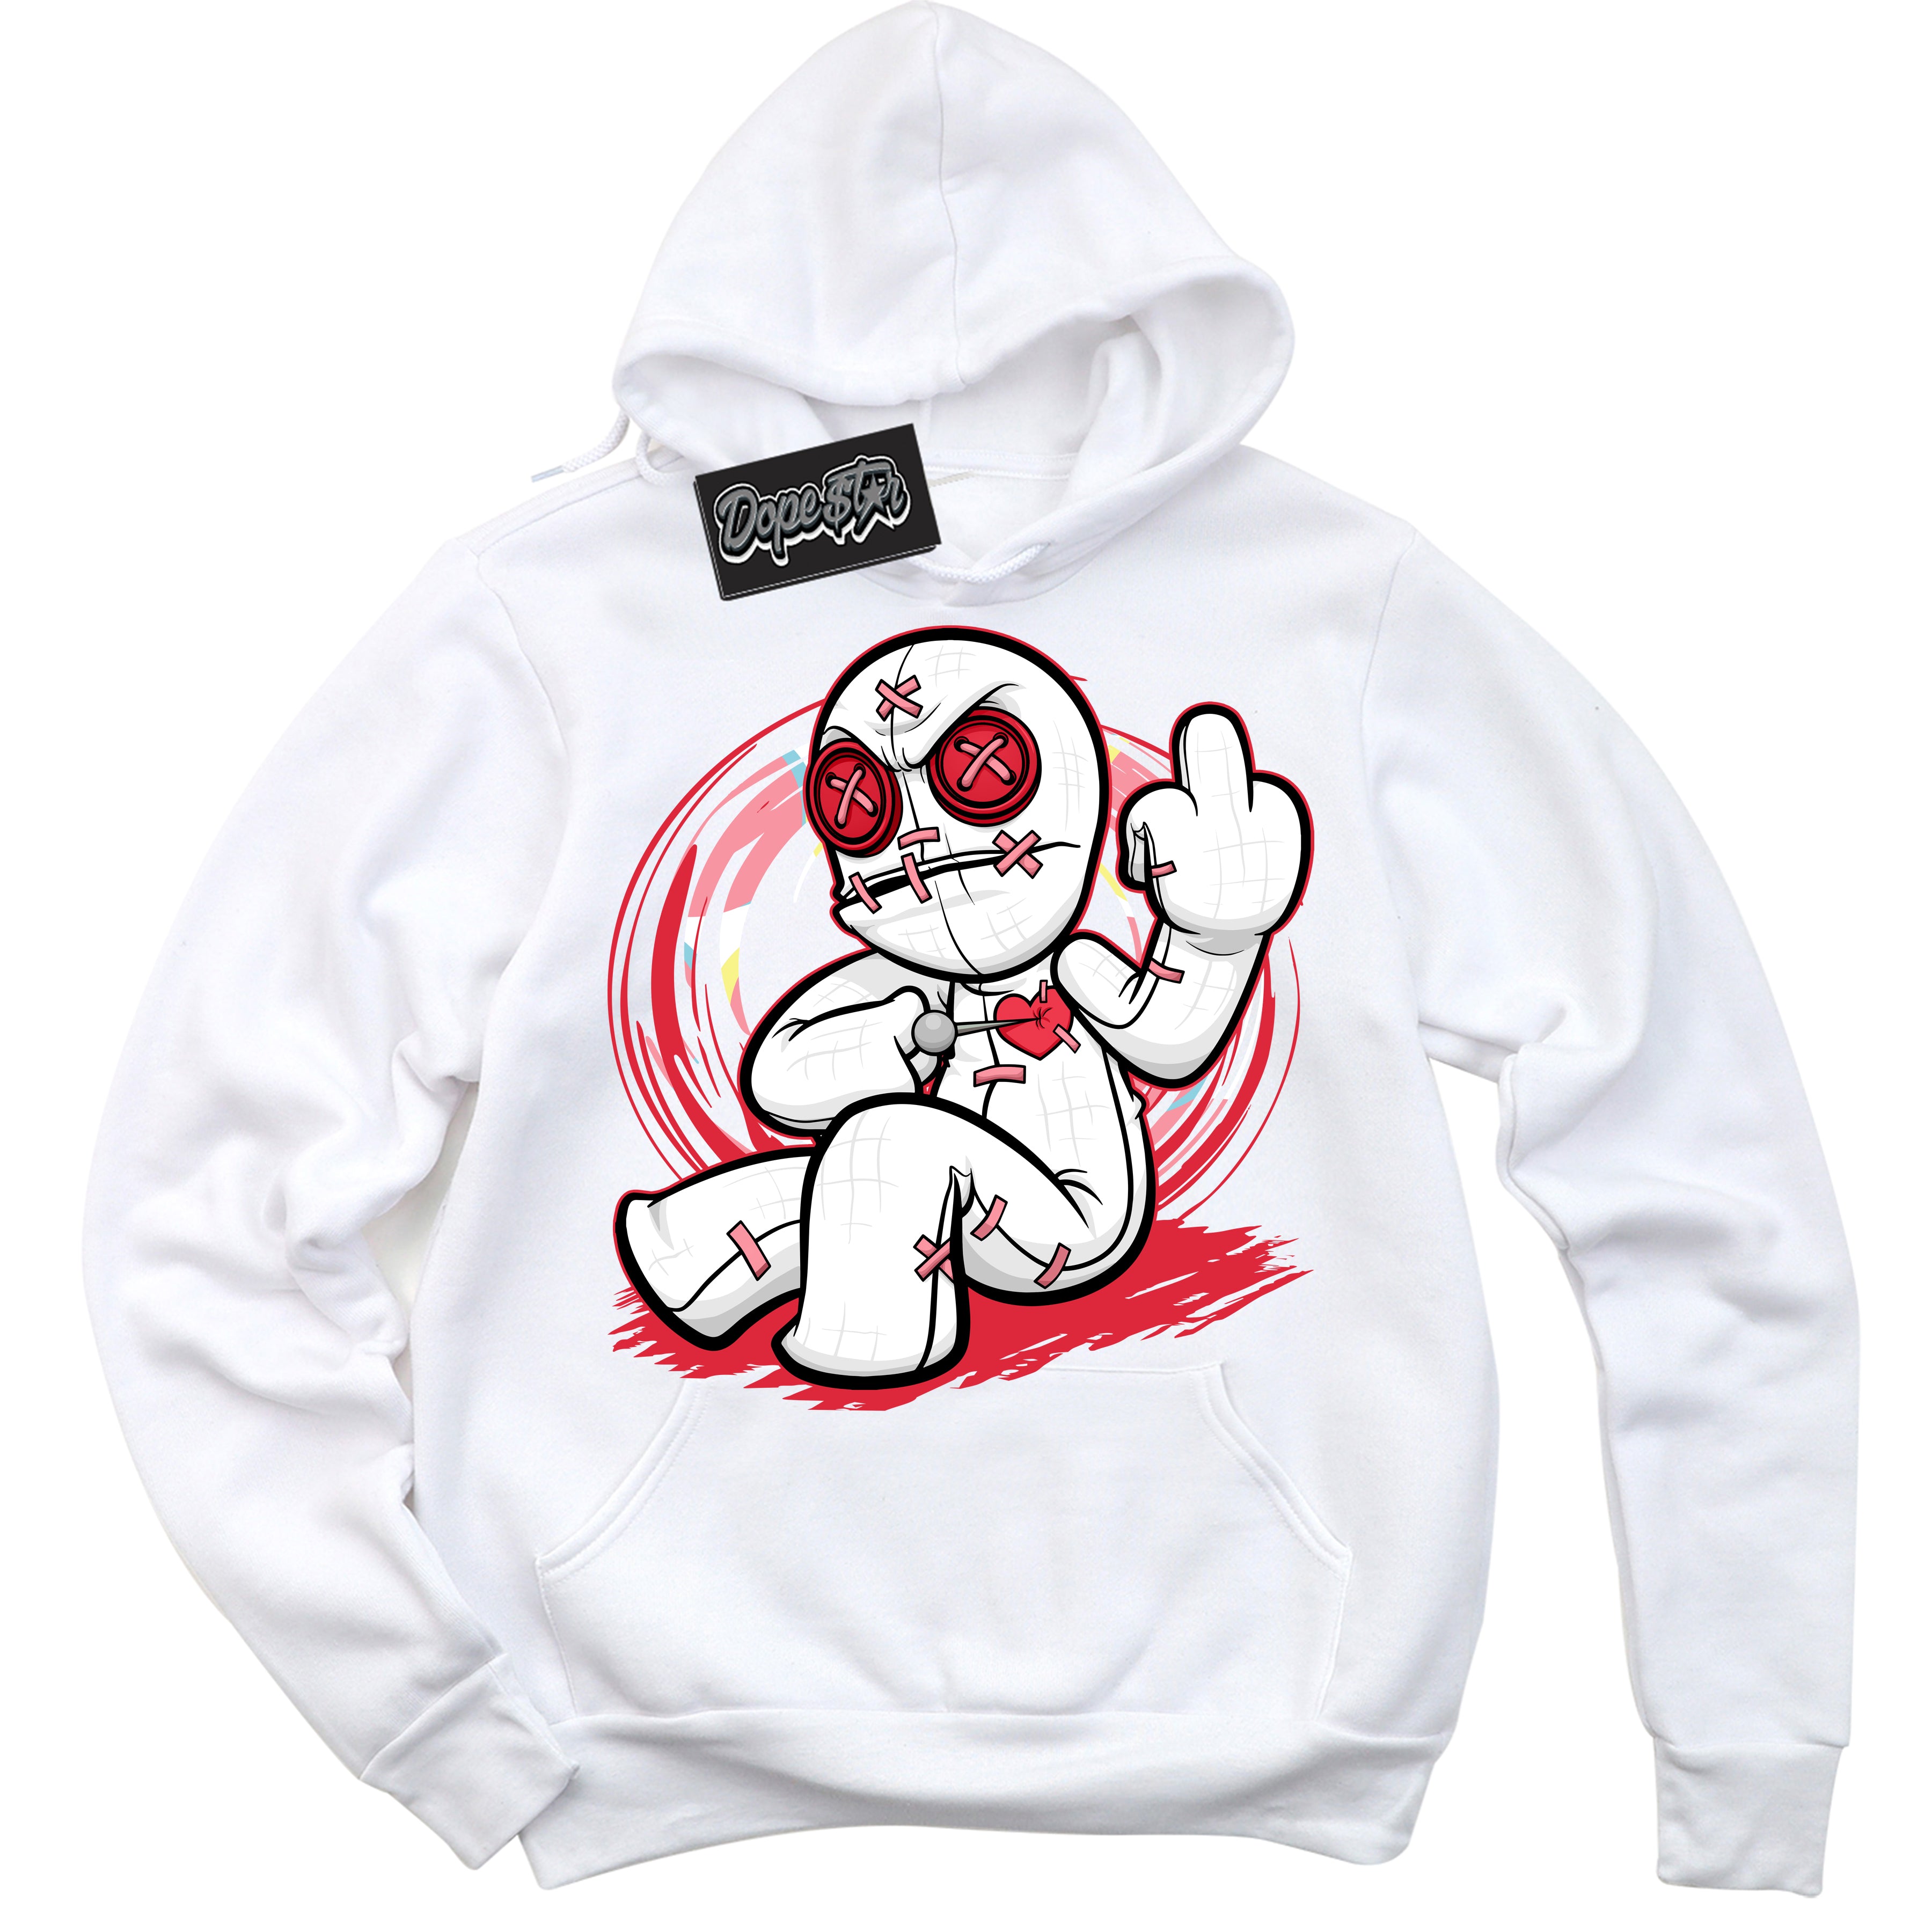 Cool White Graphic DopeStar Hoodie with “ VooDoo Doll “ print, that perfectly matches Spider-Verse 1s sneakers